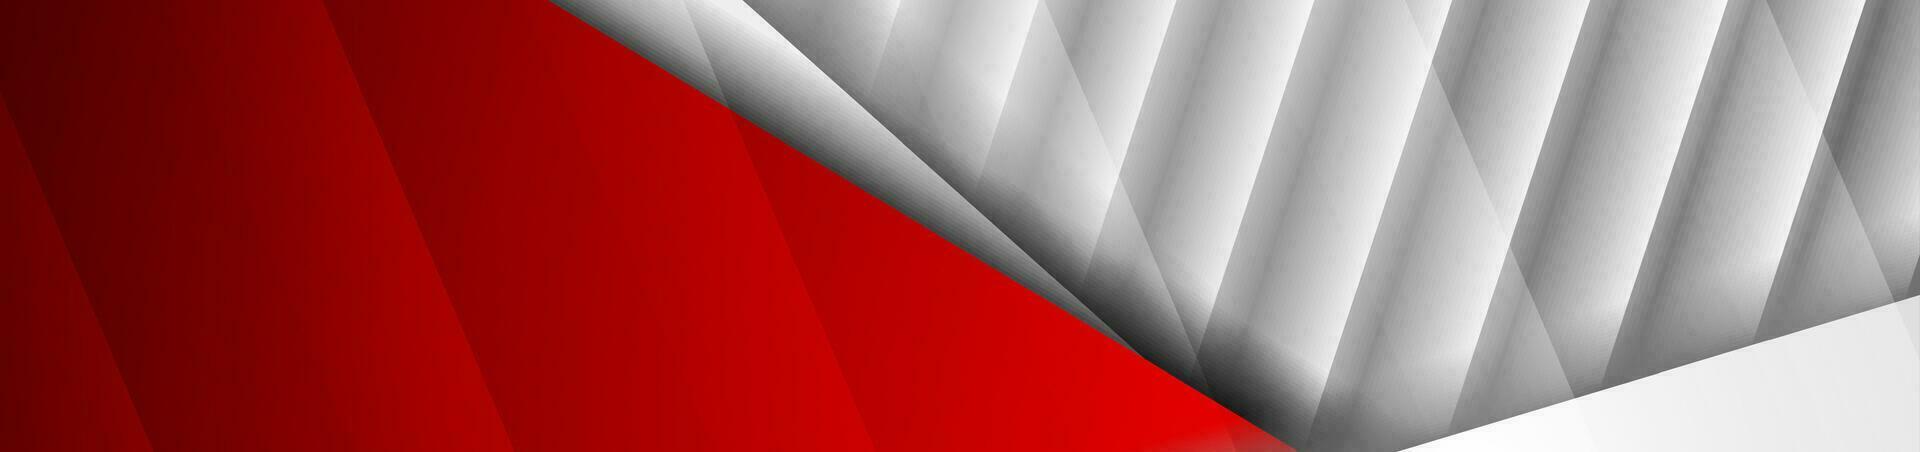 Red and grey corporate abstract striped background vector